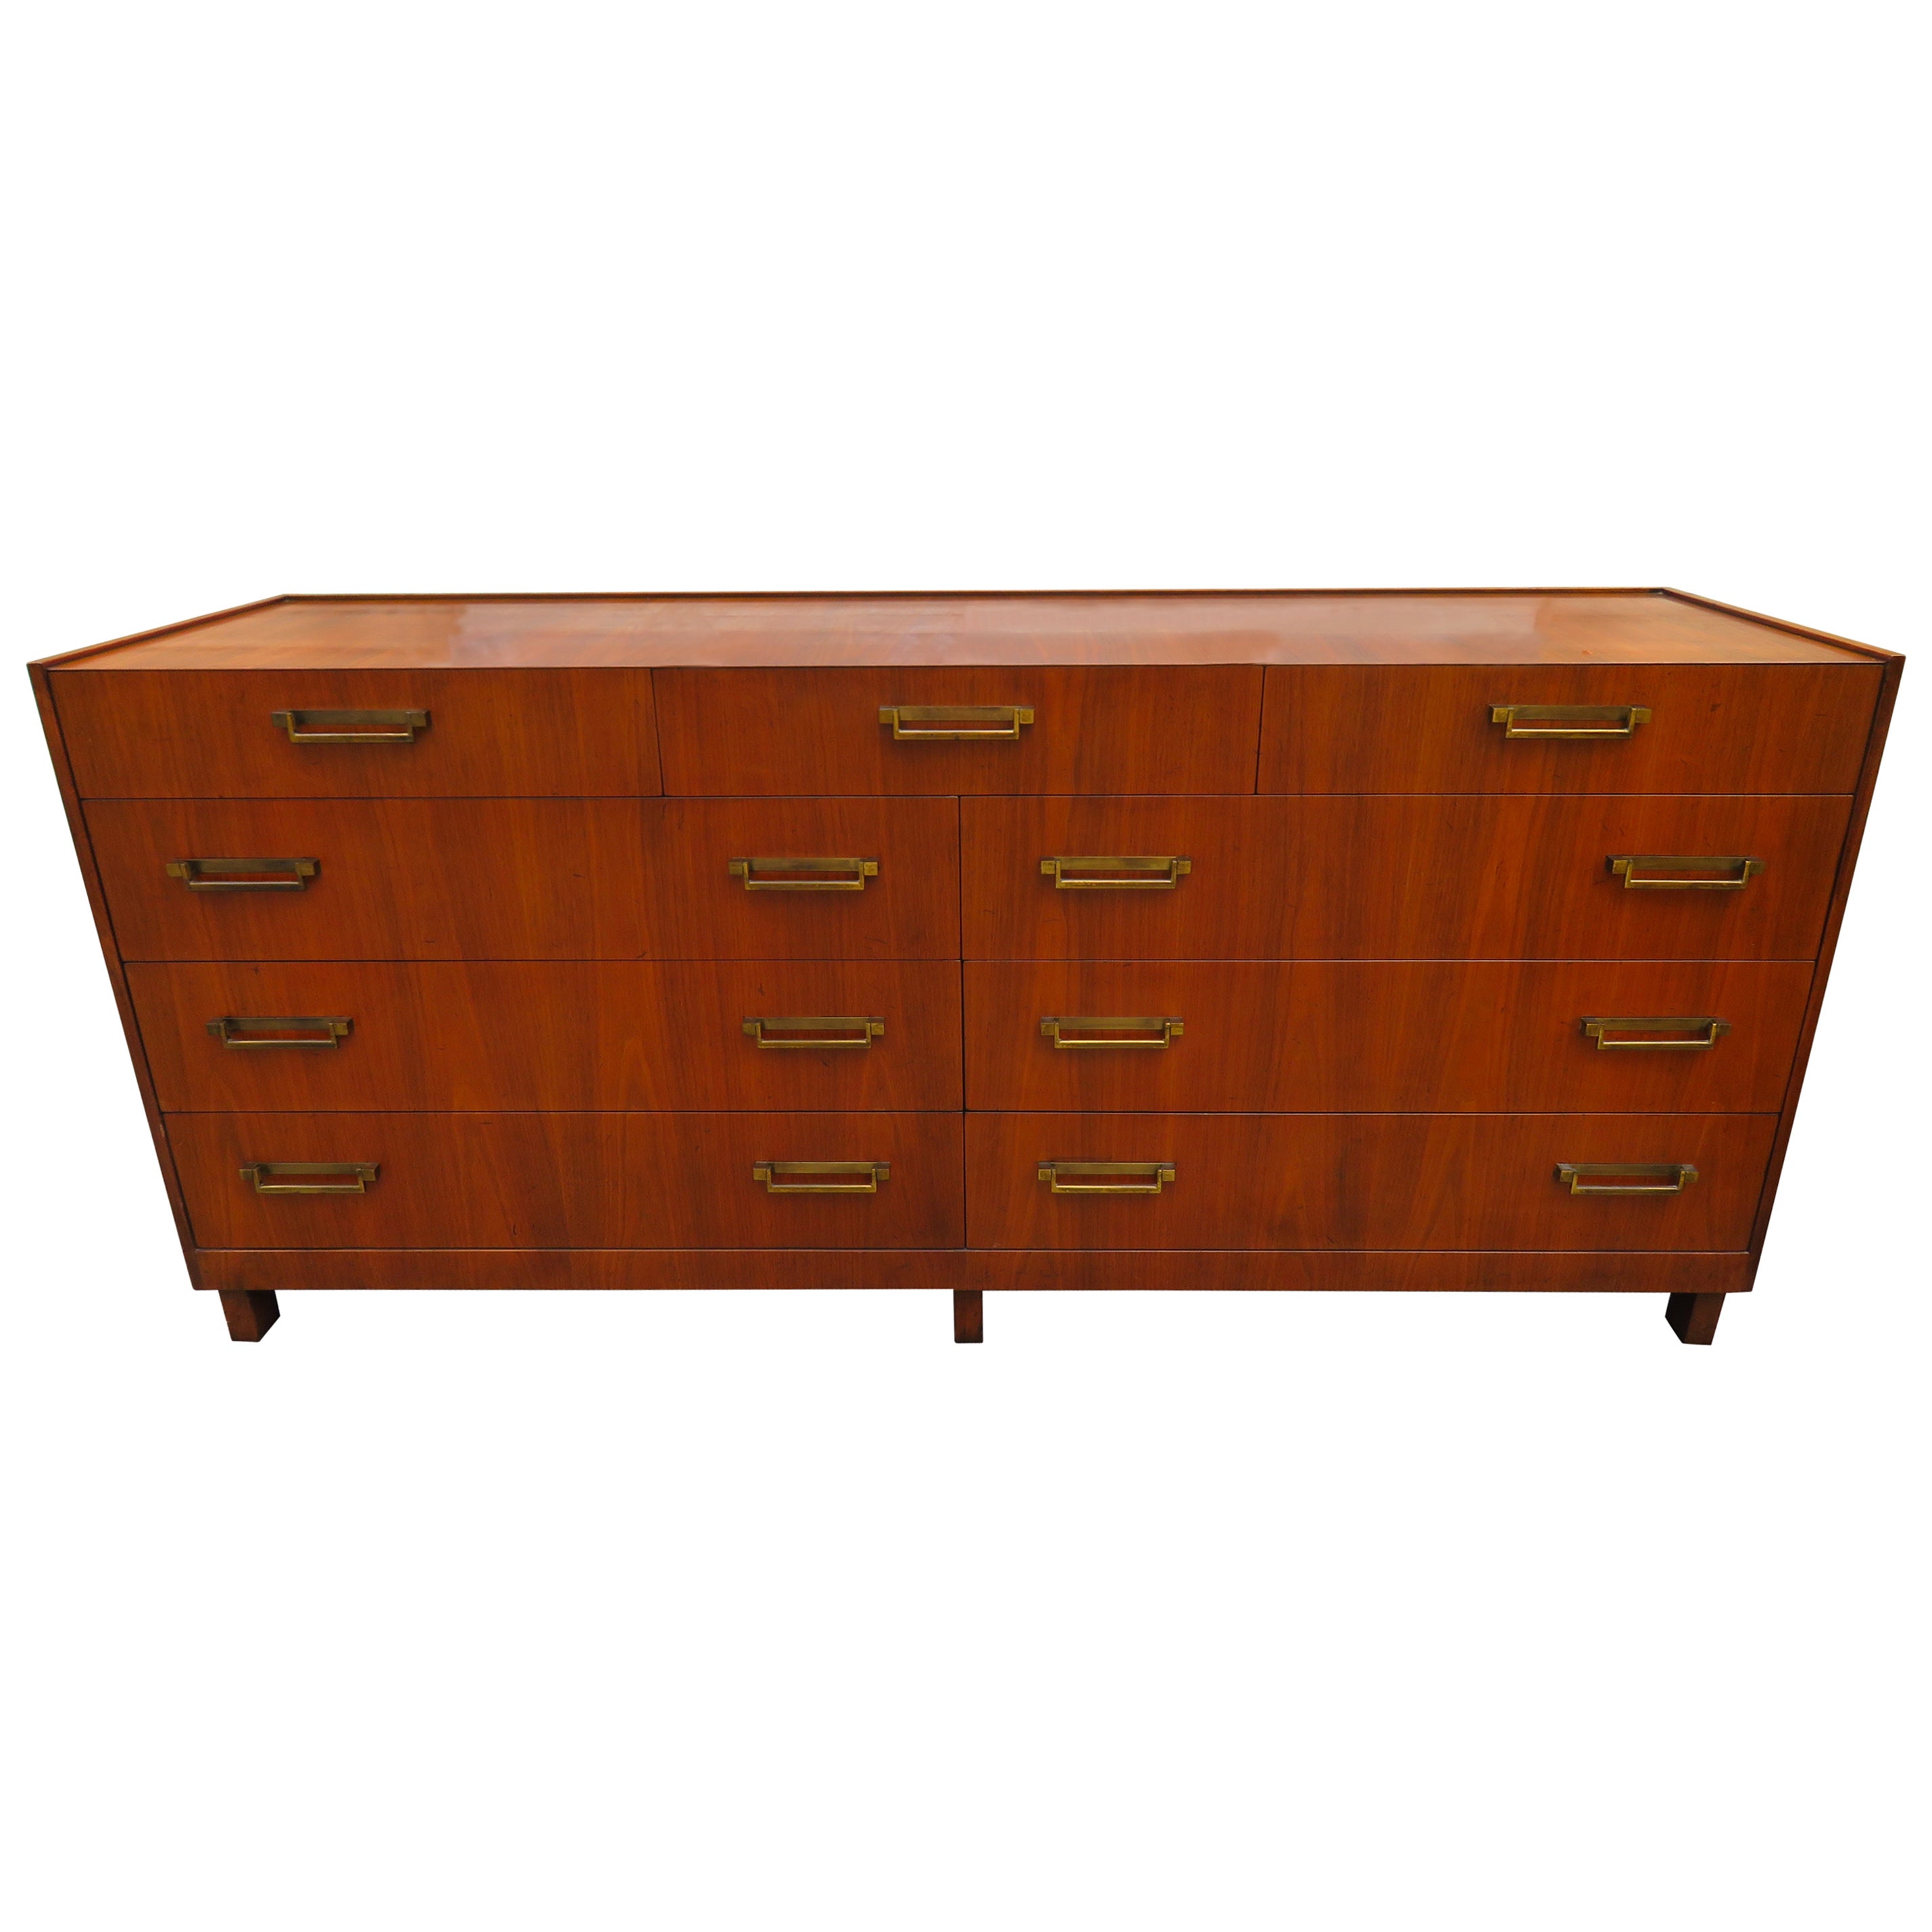 Magnificent Michael Taylor Baker Campaign Chest Mid-Century Modern For Sale